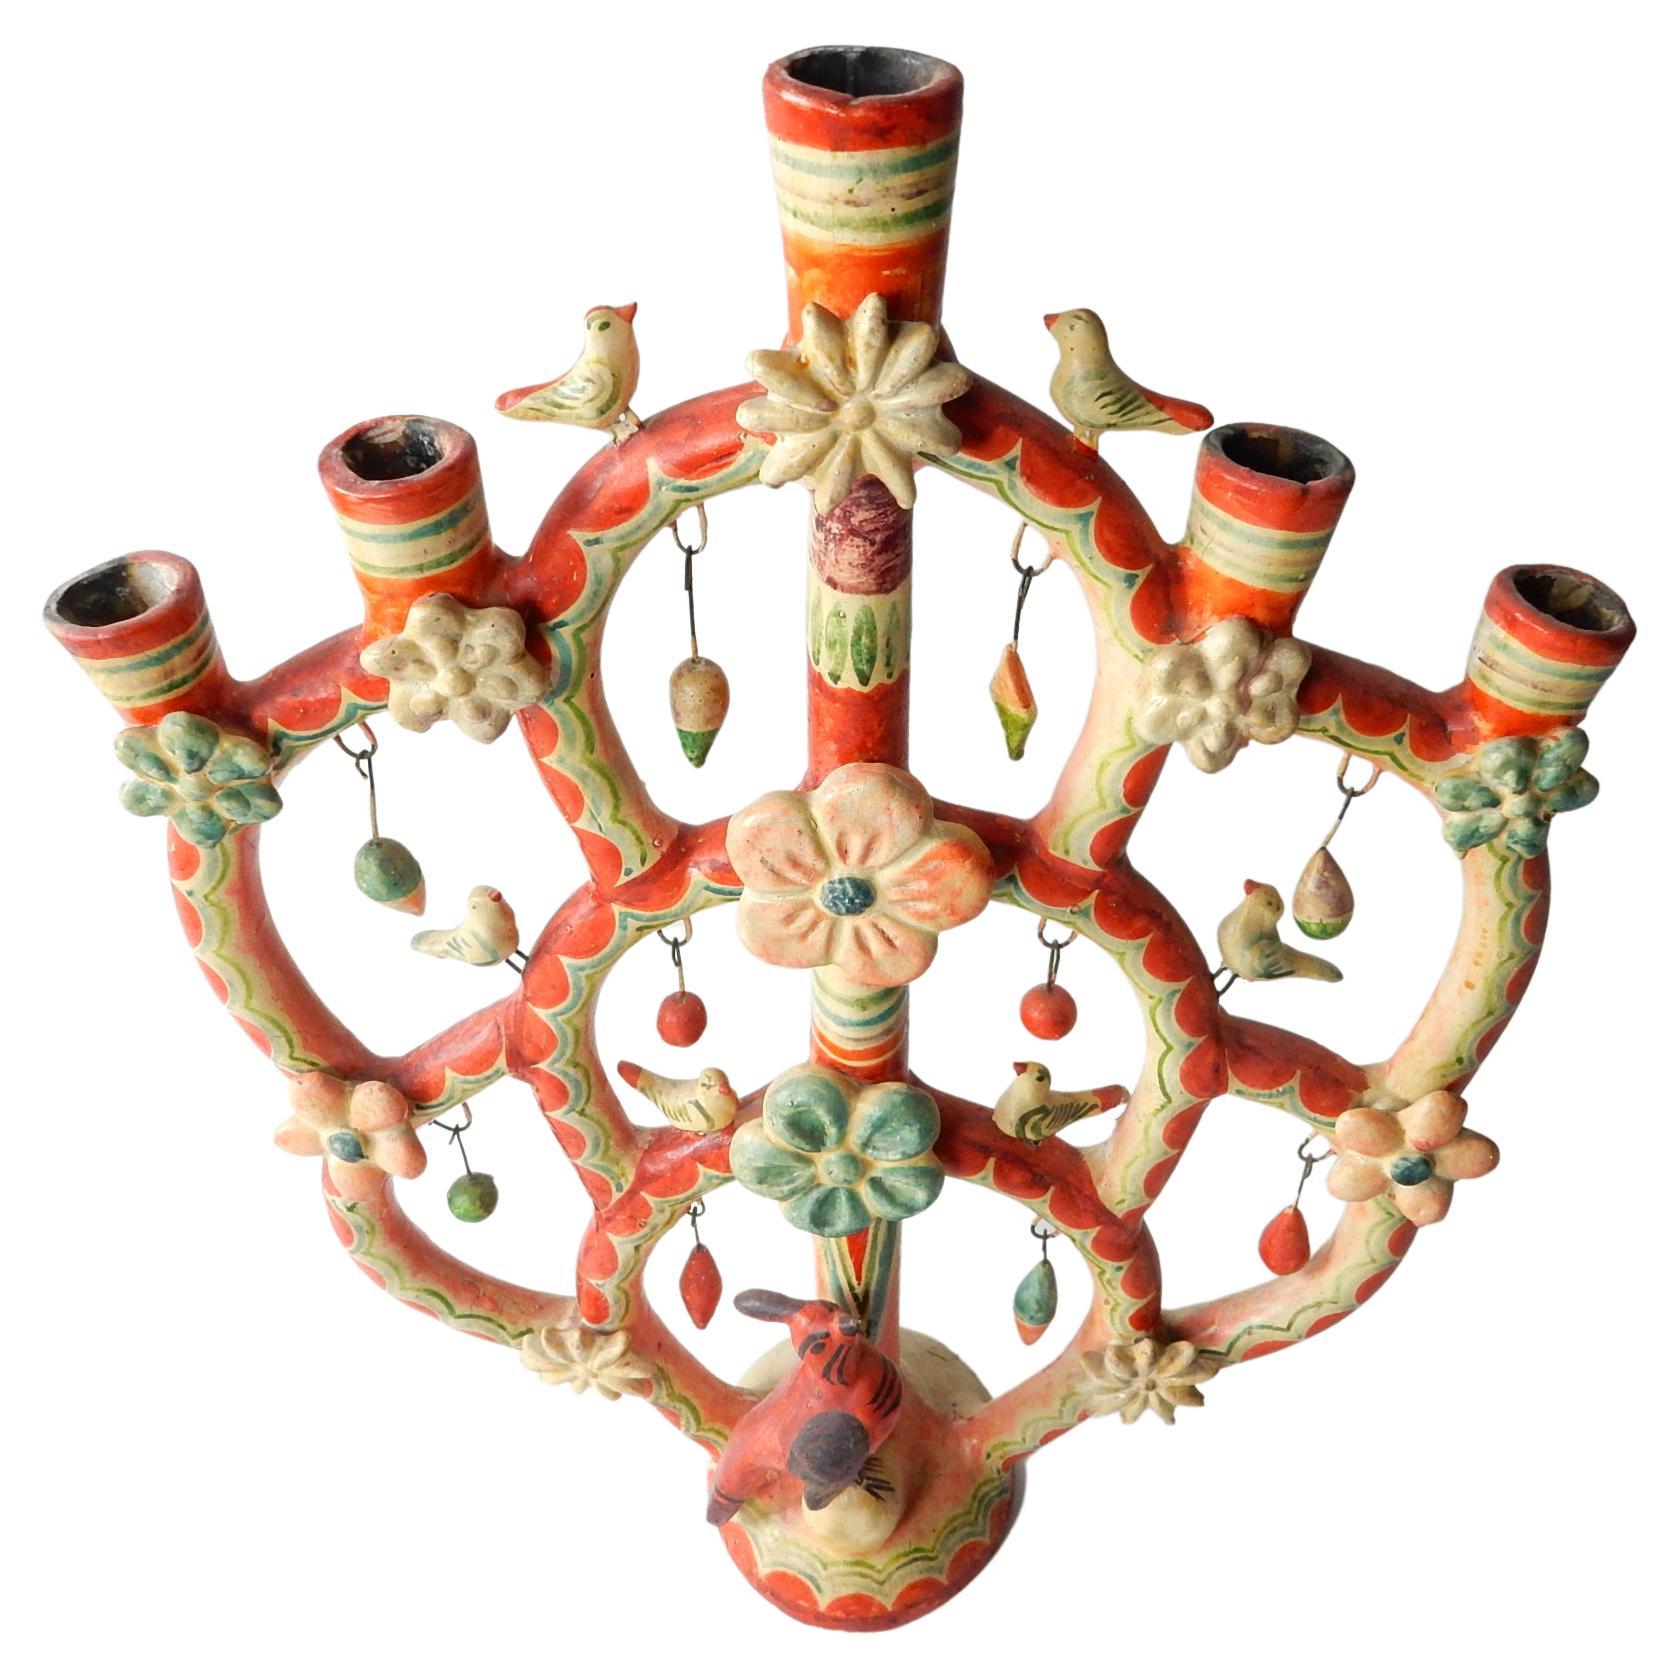 A rare, fine example of a Tree of Life candelabra by Aurelio Flores, circa 1950.
Aurelio Flores (1901-1987), the grandson of potters, began working as a child helping his parents. From the traditional candelabra and incense burners made for